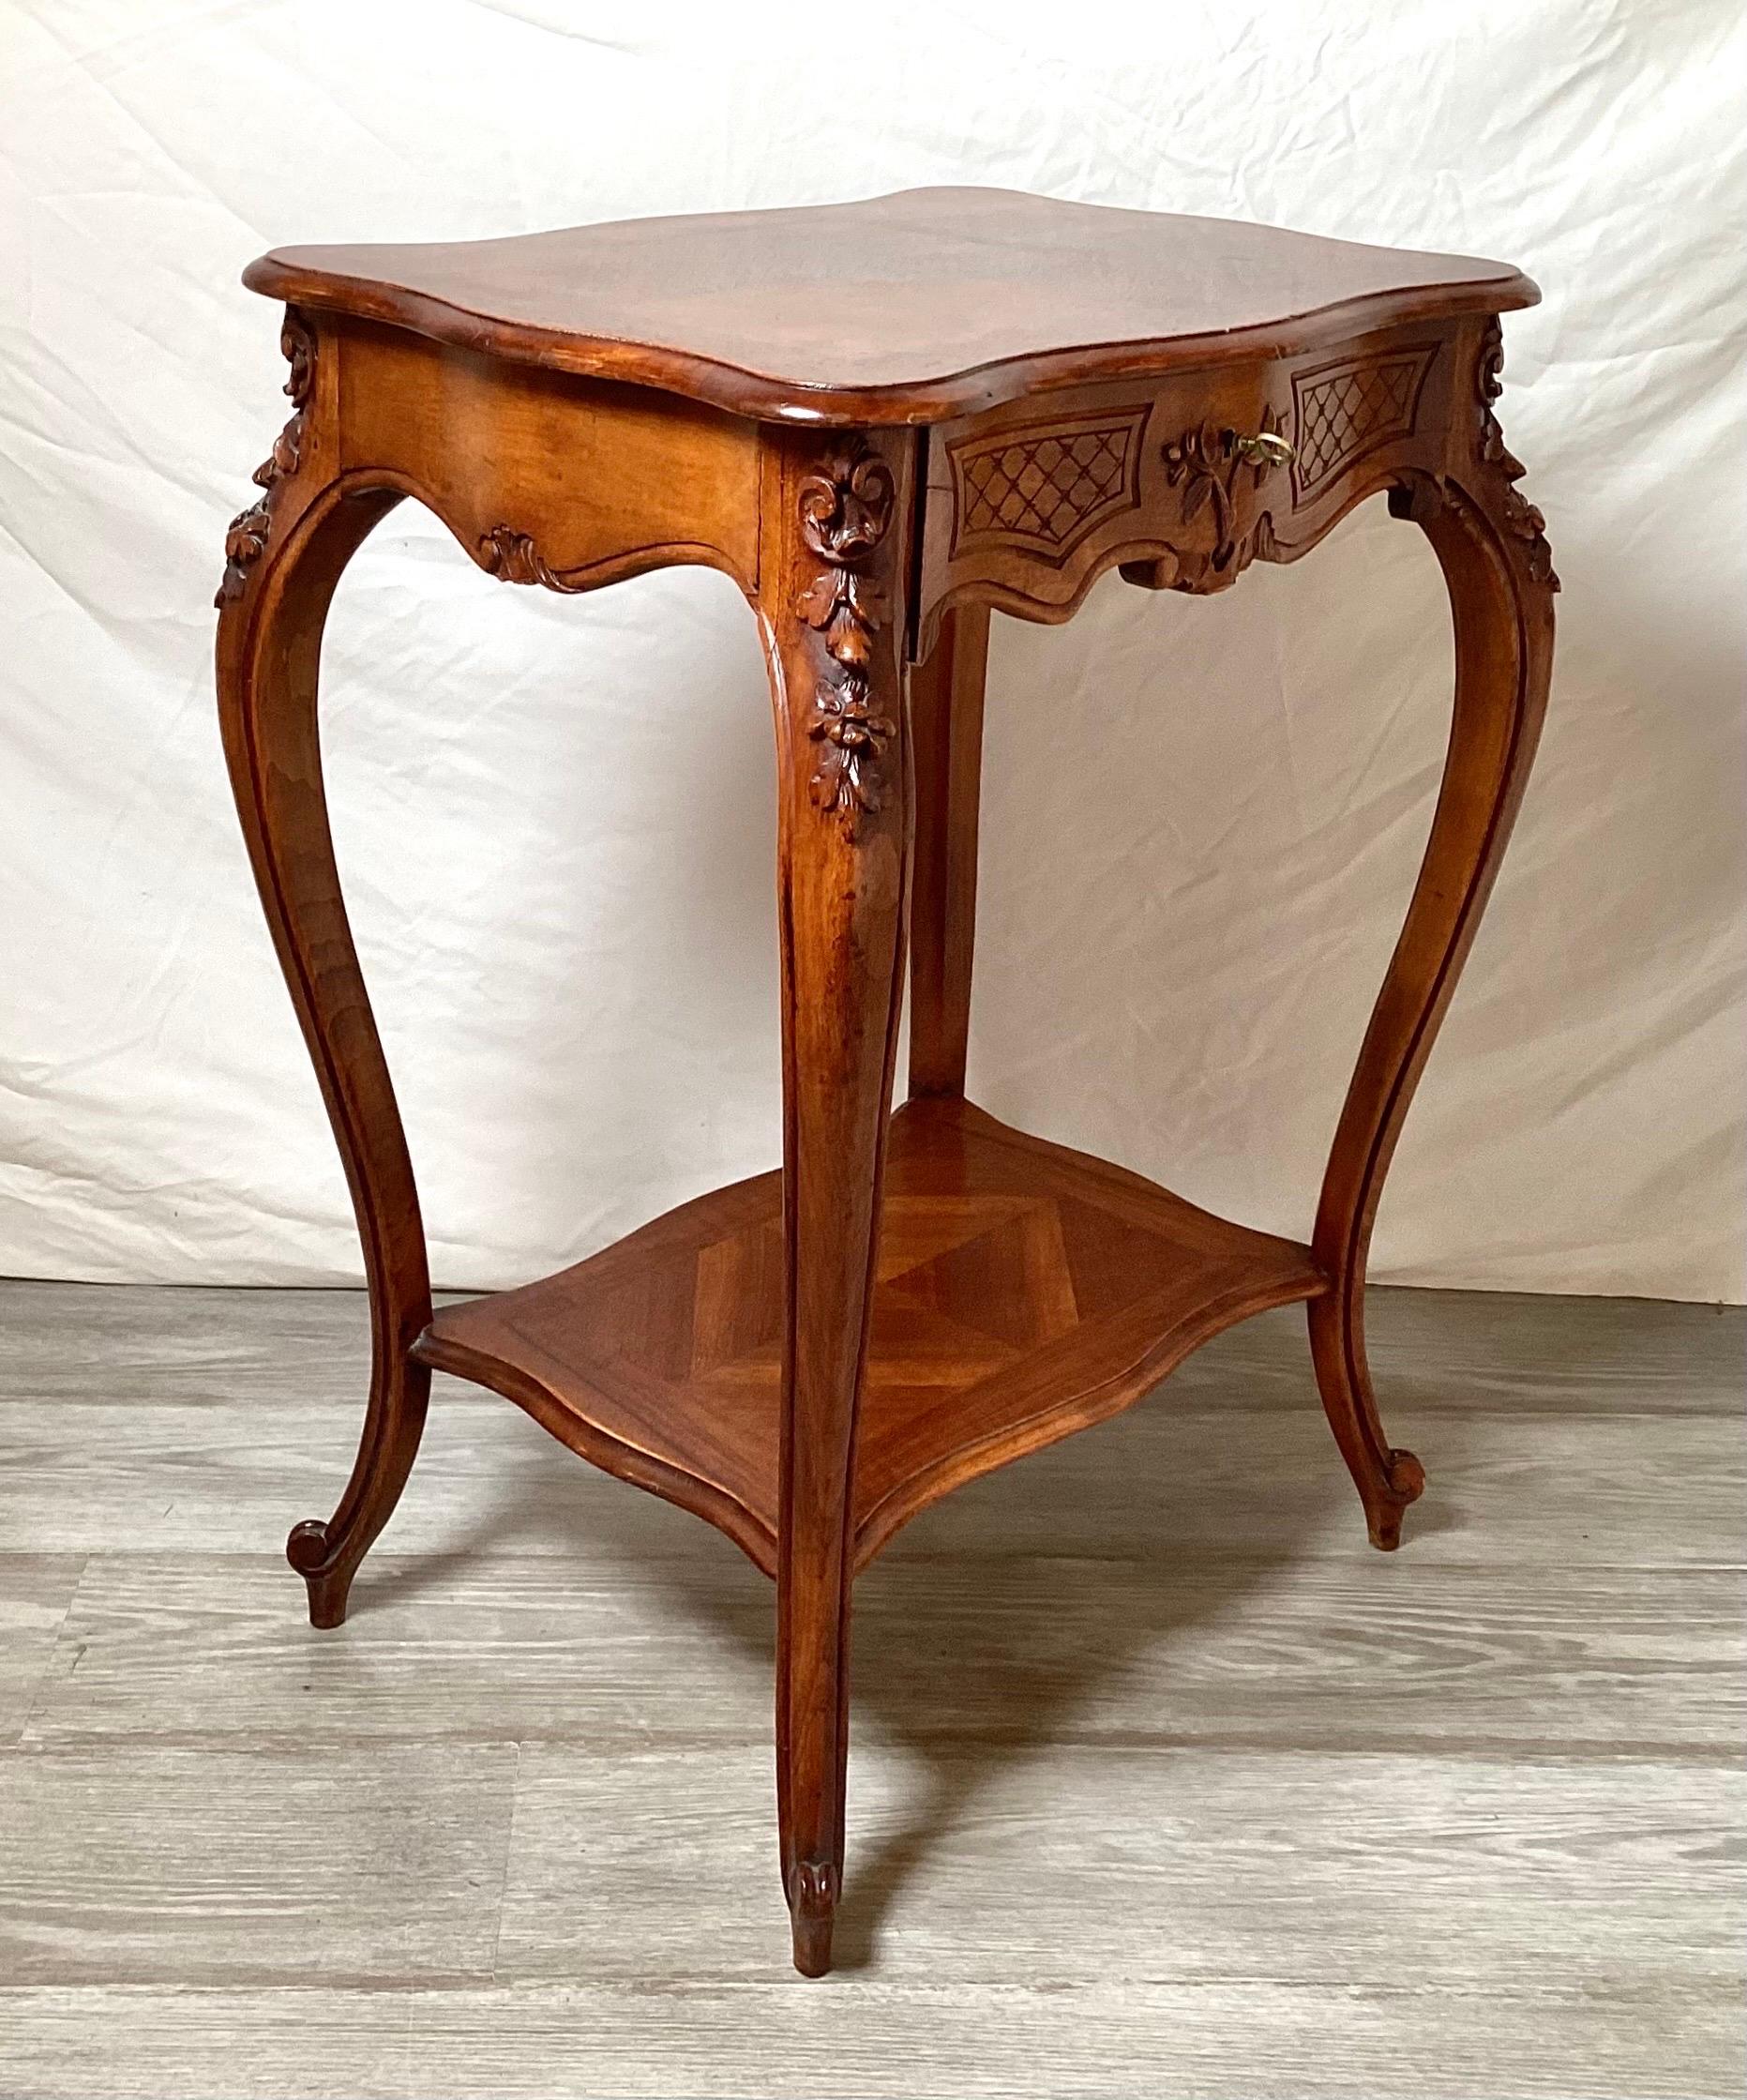 Elegant hand carved walnut side table. The shapely top with drawer with brass pull supported by four curved cabriole legs with lower shelf. The wood finish in excellent condition with a nice warm natural patination.